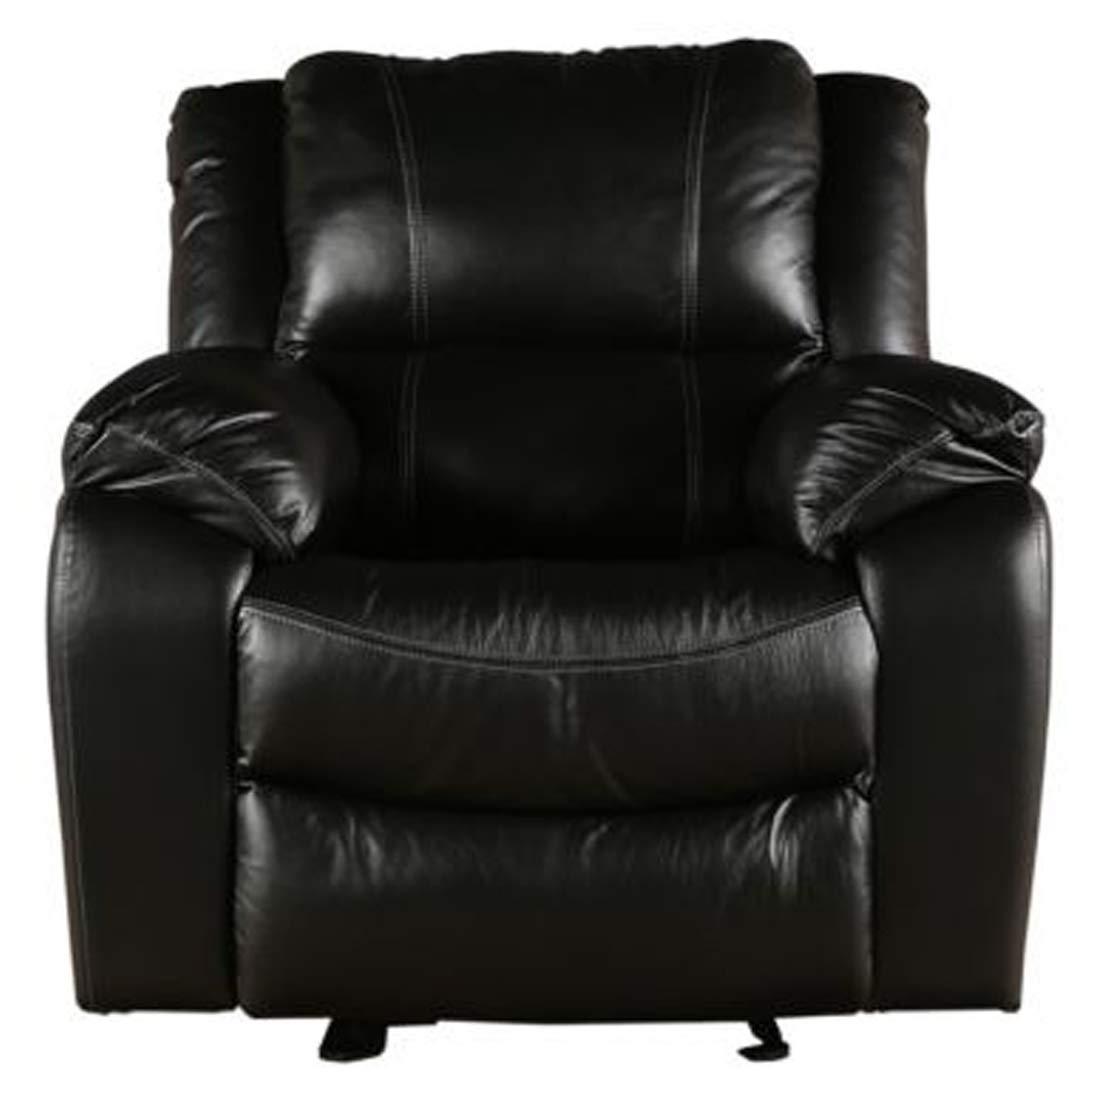 Single Seater 1 Seat Recliner Sofa with Premium Leatherette, Black